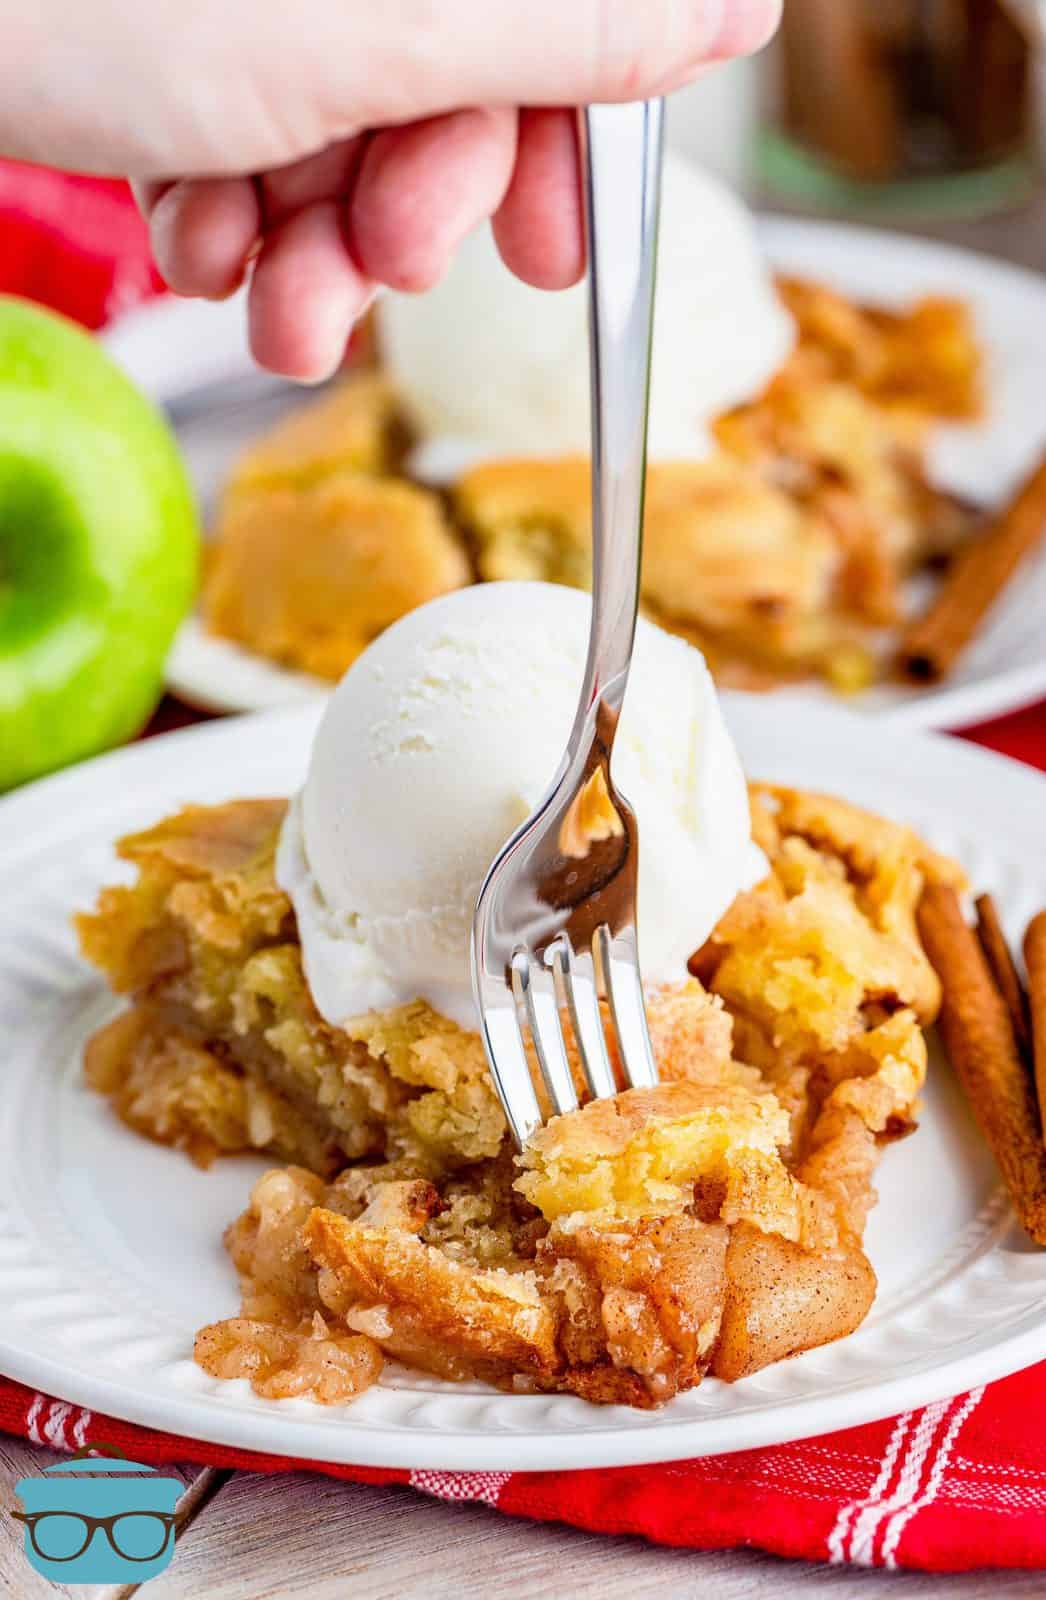 Piece of Grammie's Swedish Apple Pie on plate with ice cream and fork poking into slice.